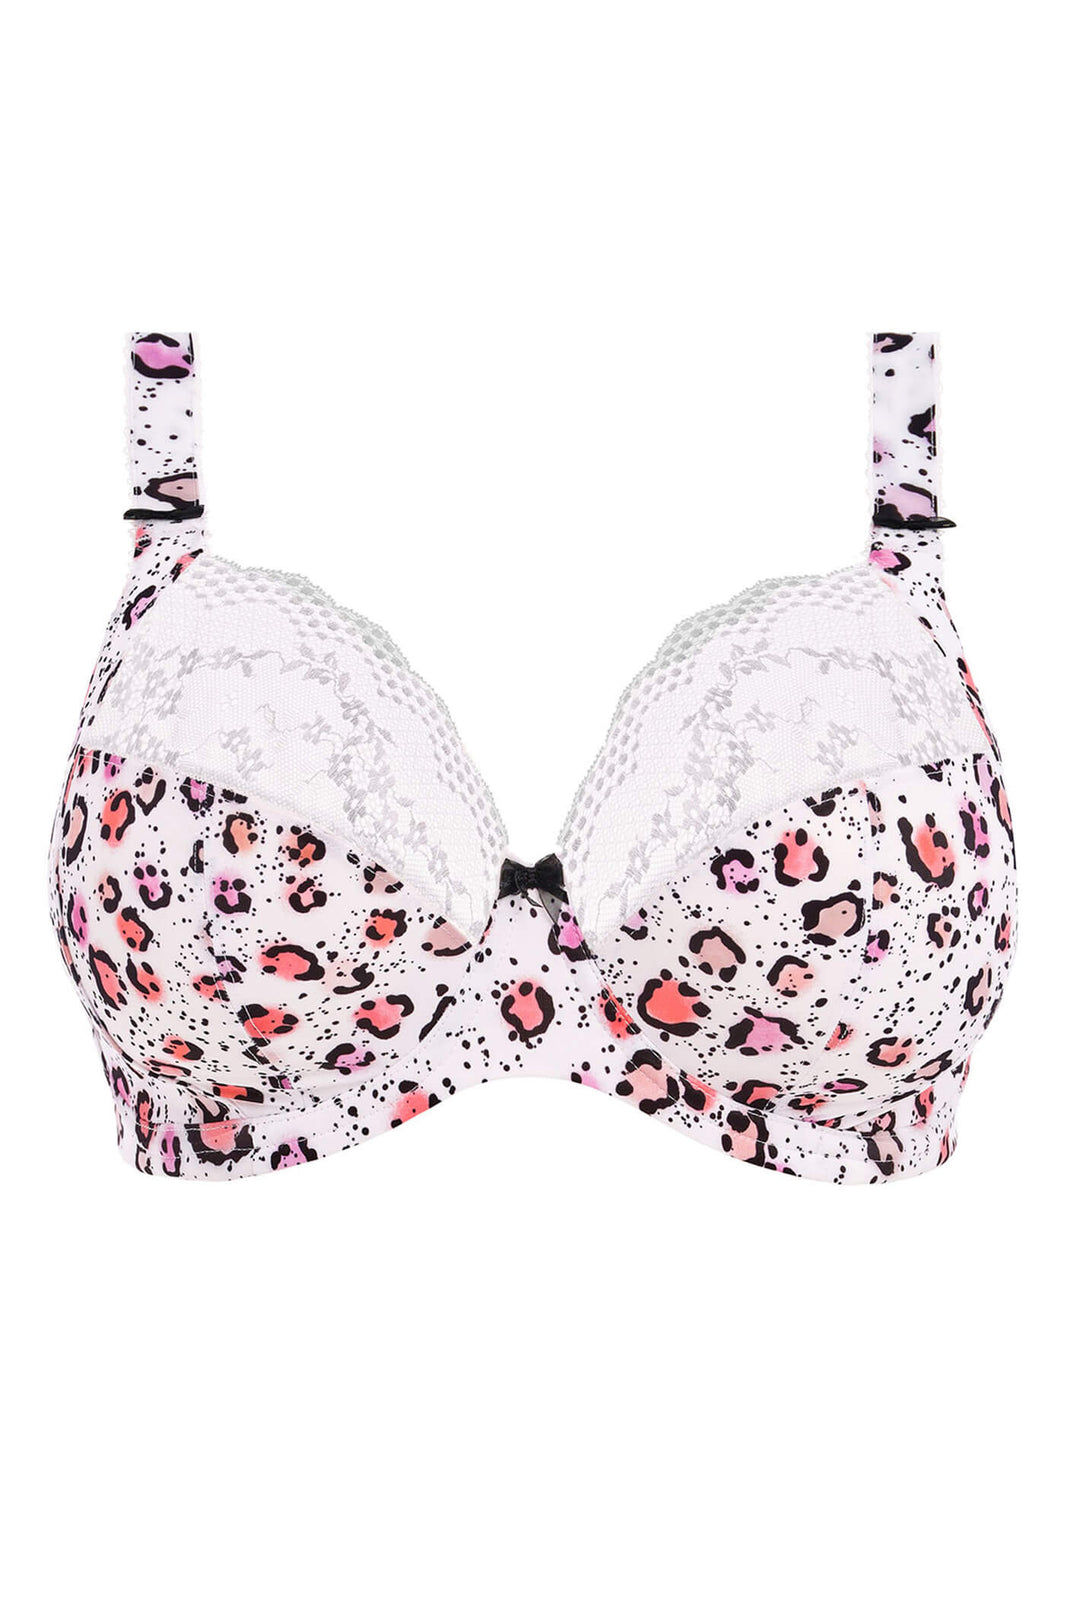 Elomi EL4490RMB Lucie White Rumble Underwired Stretch Plunge Bra - Rouge Boutique Inverness